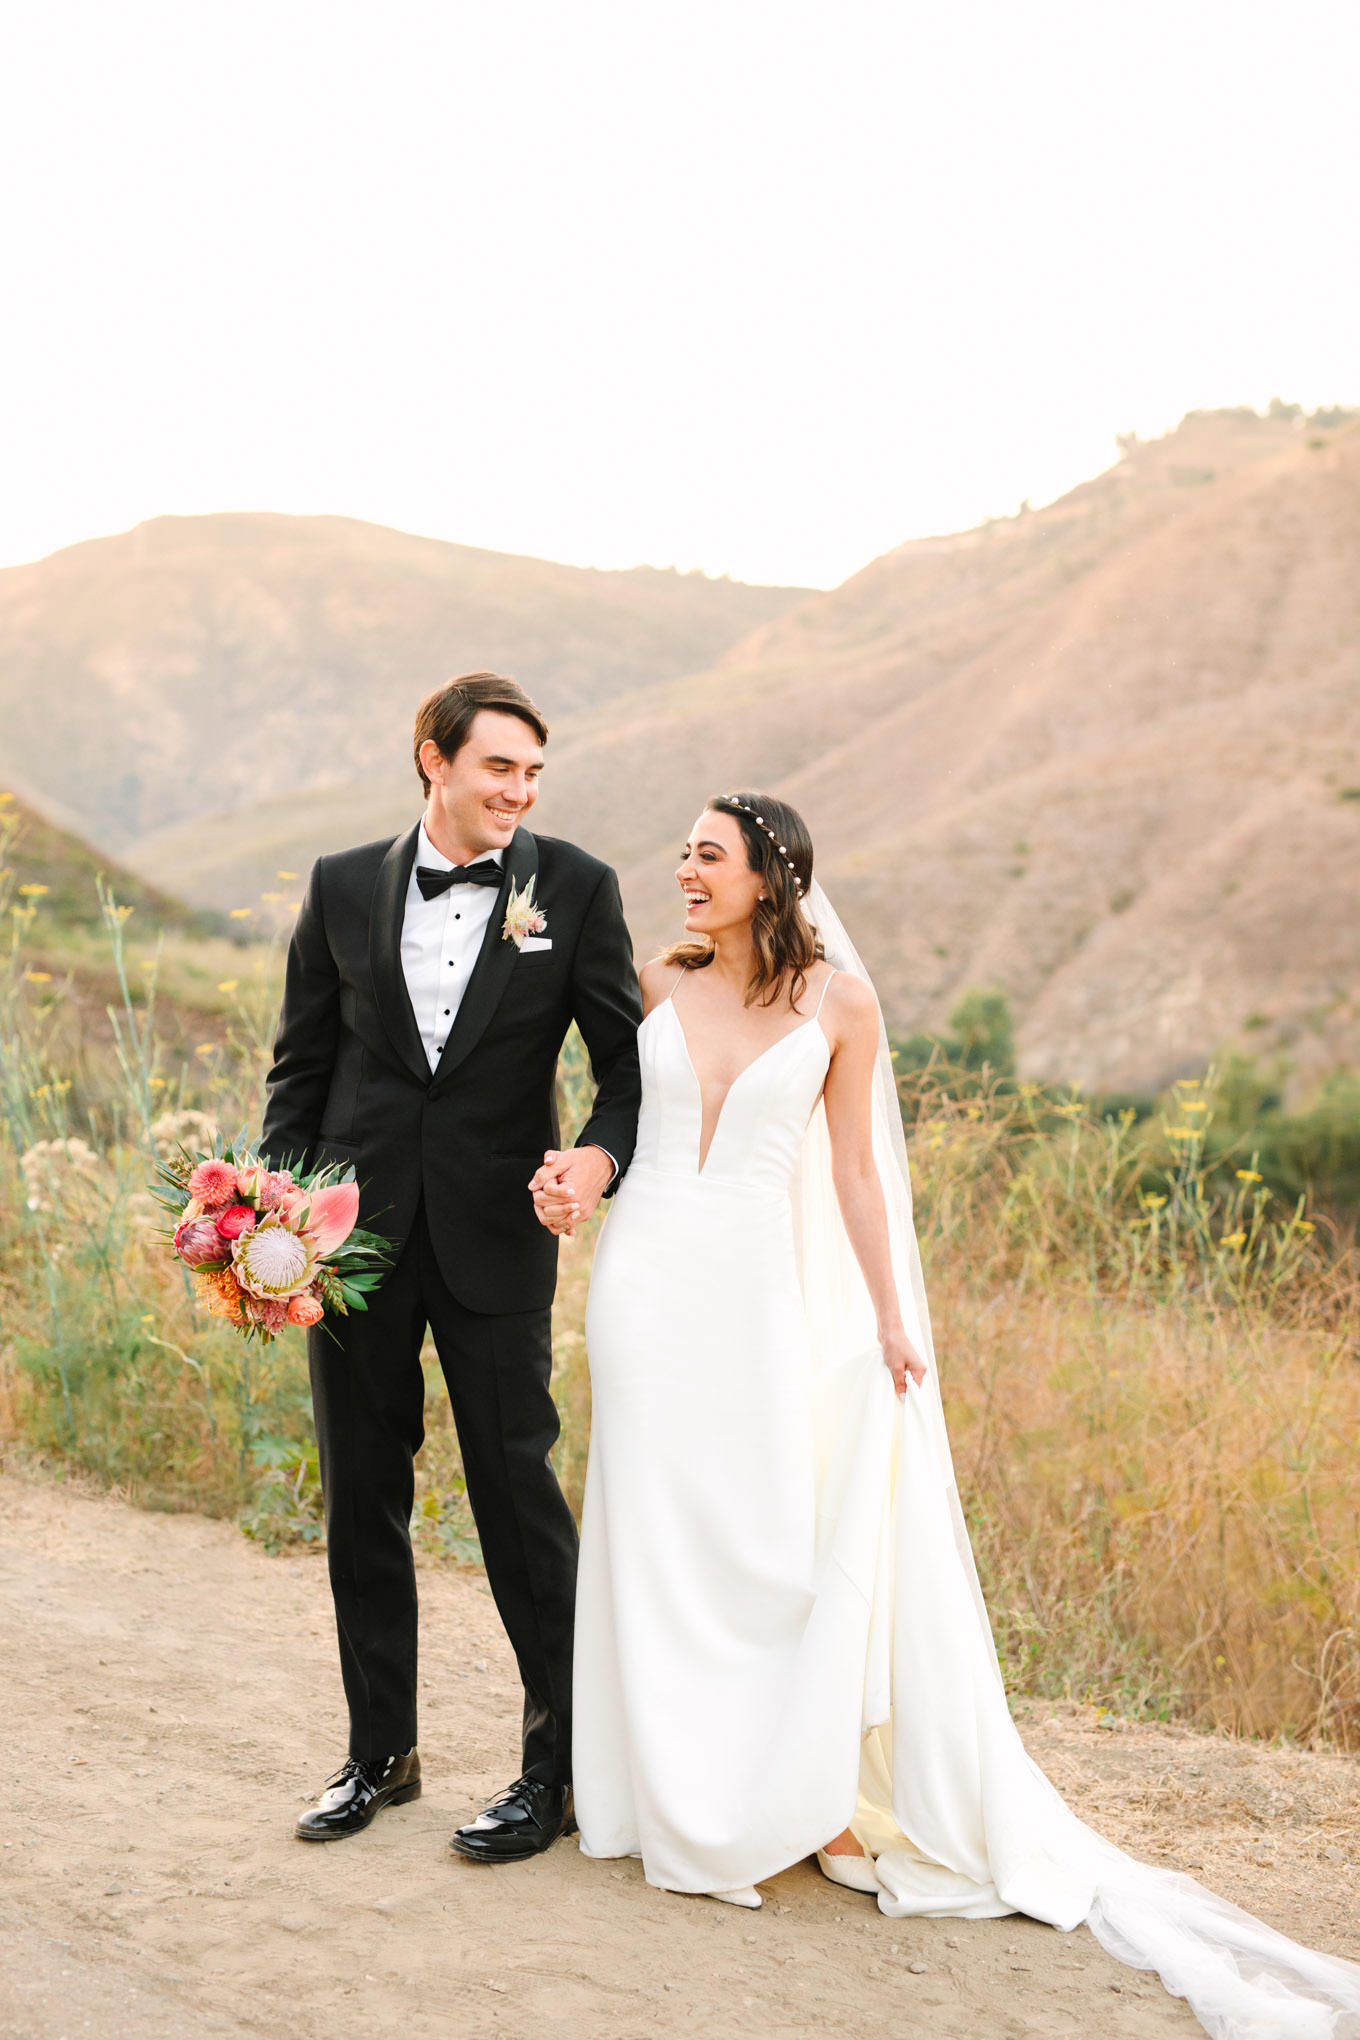 Bride and groom laughing at Malibu Canyon micro wedding | Engagement, elopement, and wedding photography roundup of Mary Costa’s favorite images from 2020 | Colorful and elevated photography for fun-loving couples in Southern California | #2020wedding #elopement #weddingphoto #weddingphotography #microwedding   Source: Mary Costa Photography | Los Angeles